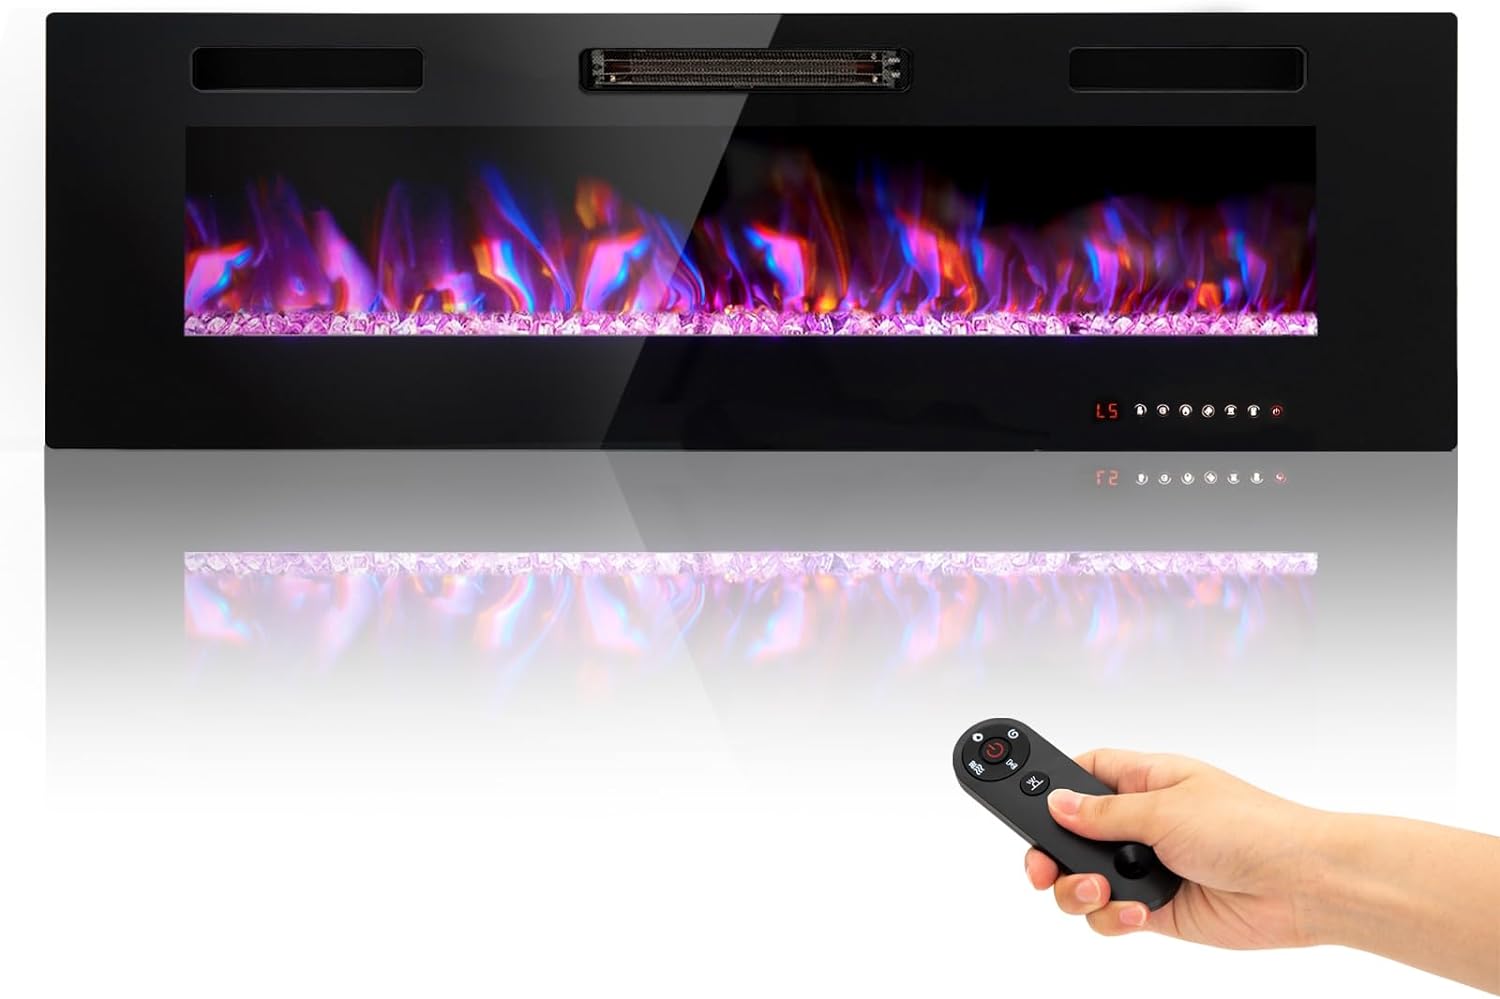 MFSTUDIO 60 inches Electric Fireplace with Remote Control & Touch Screen, Recessed and Wall Mounted Fireplace Heater, Linear Fireplace with 12 Colors Adjustable Flame Color, Timer, 750w/1500w